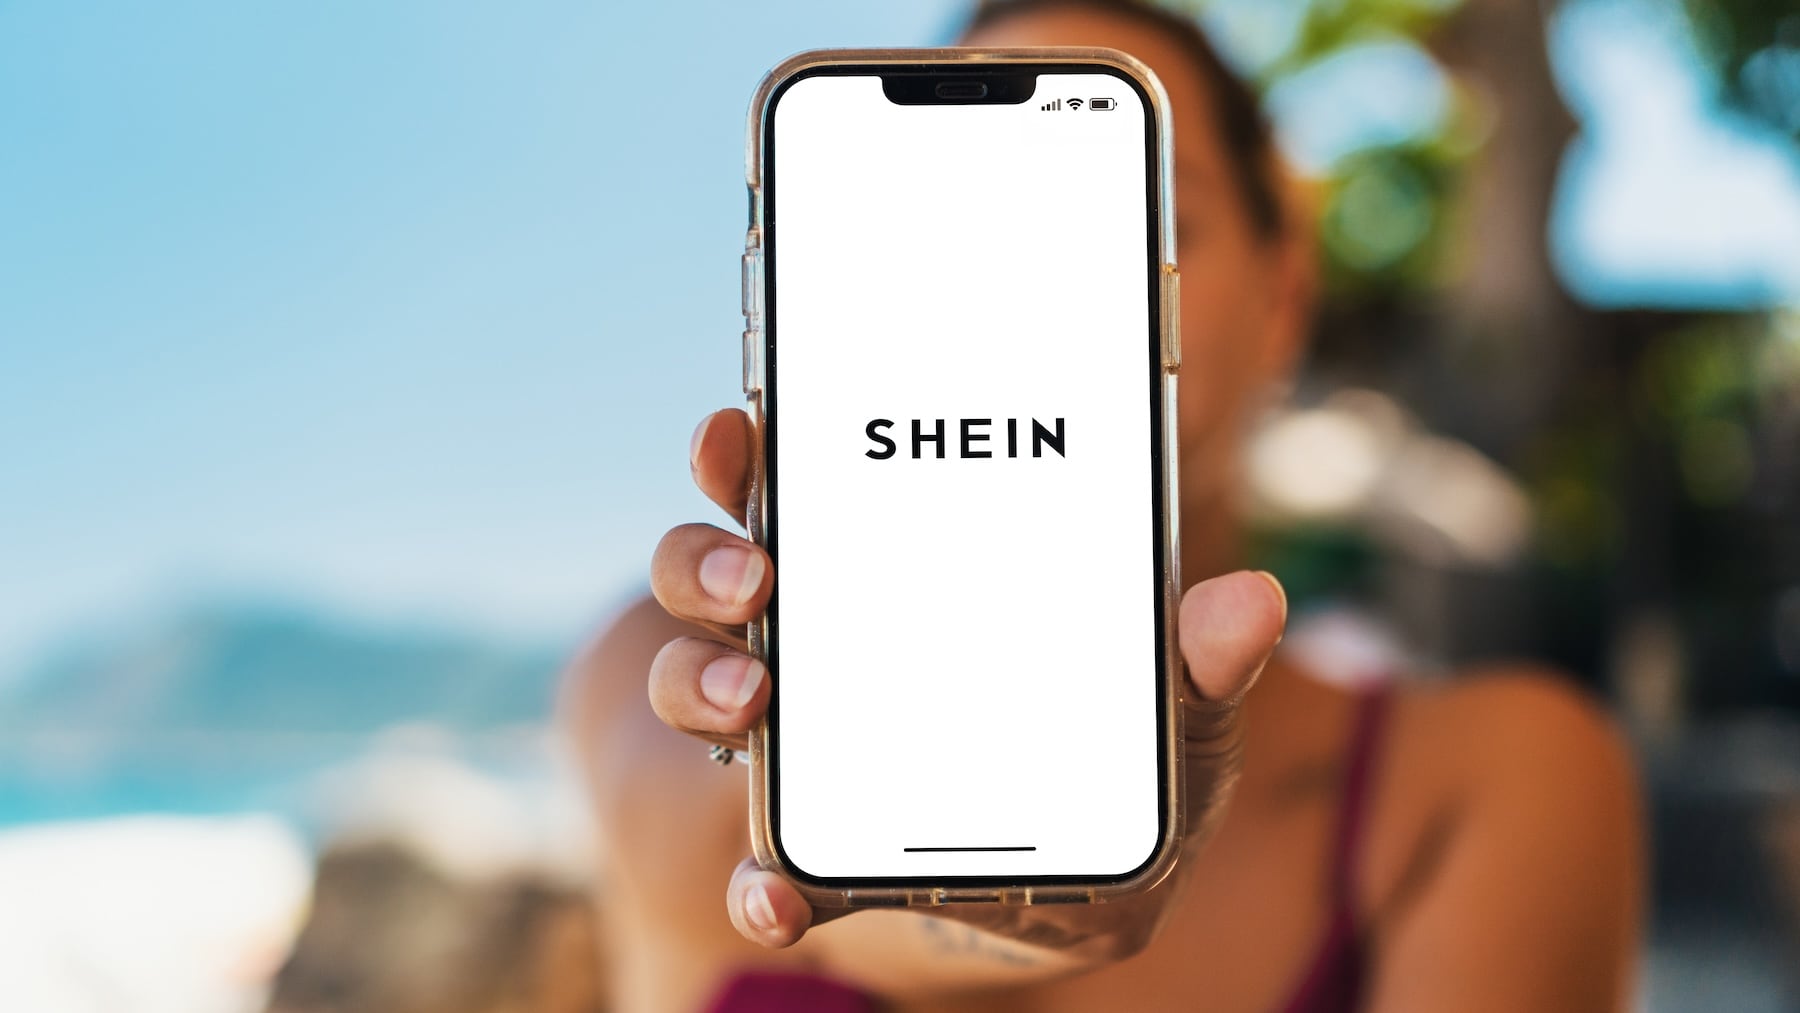 Shein Files for London IPO, Reuters Reports